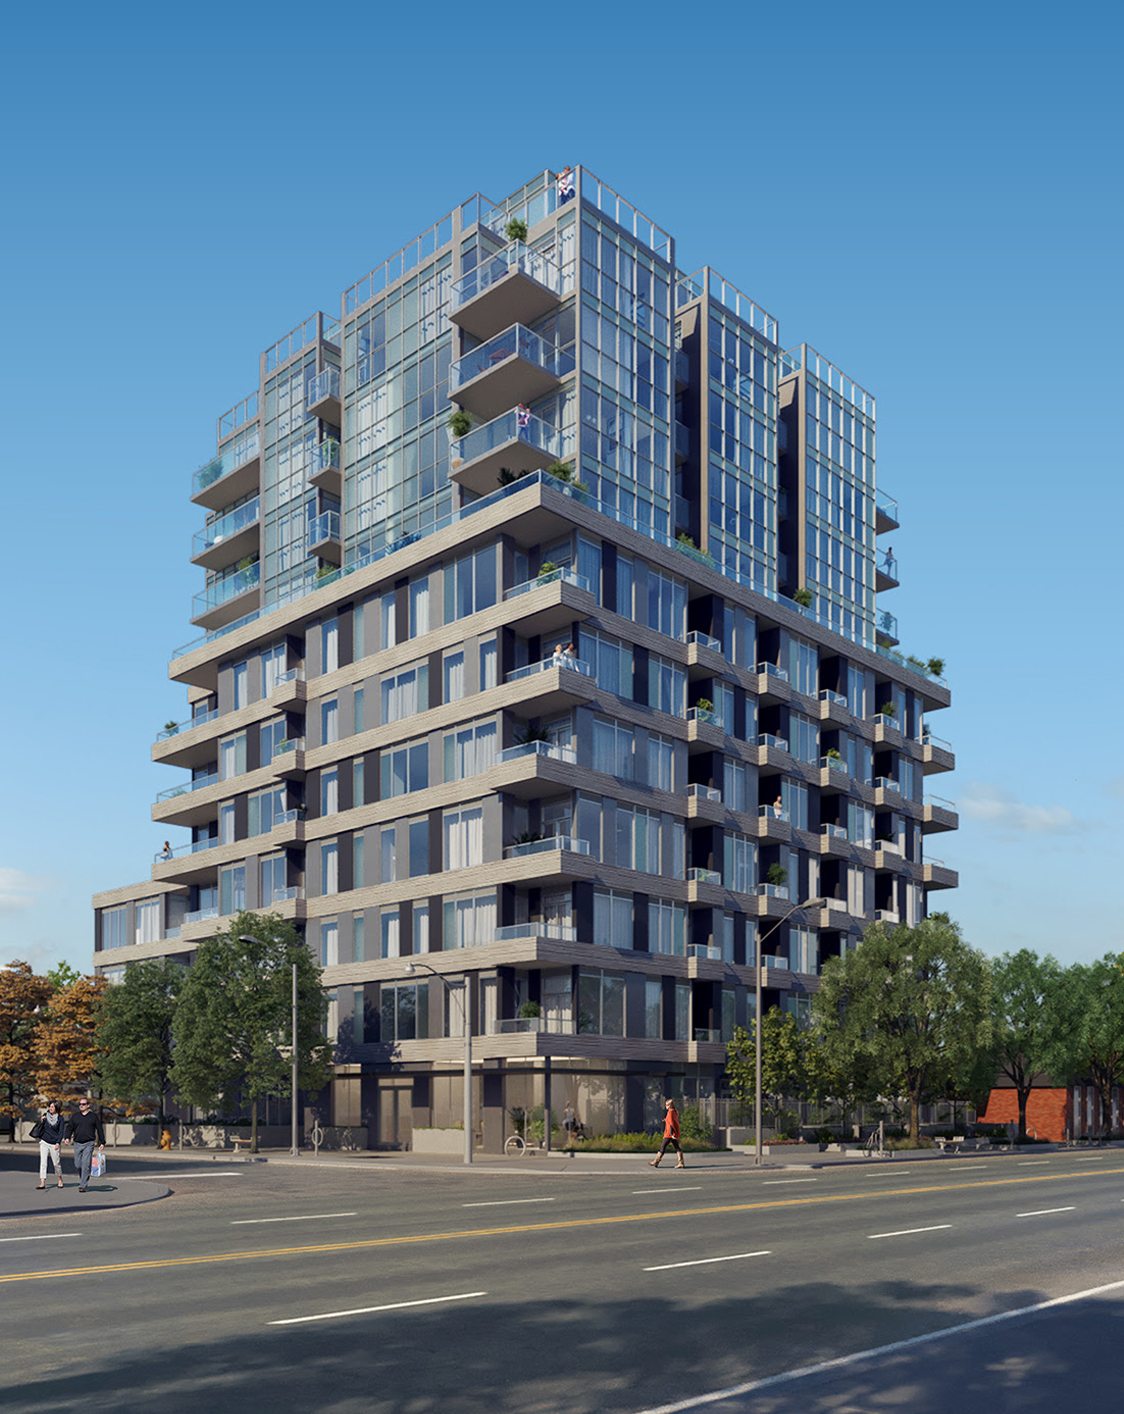 The Cardiff condos rendering of the building exterior during day